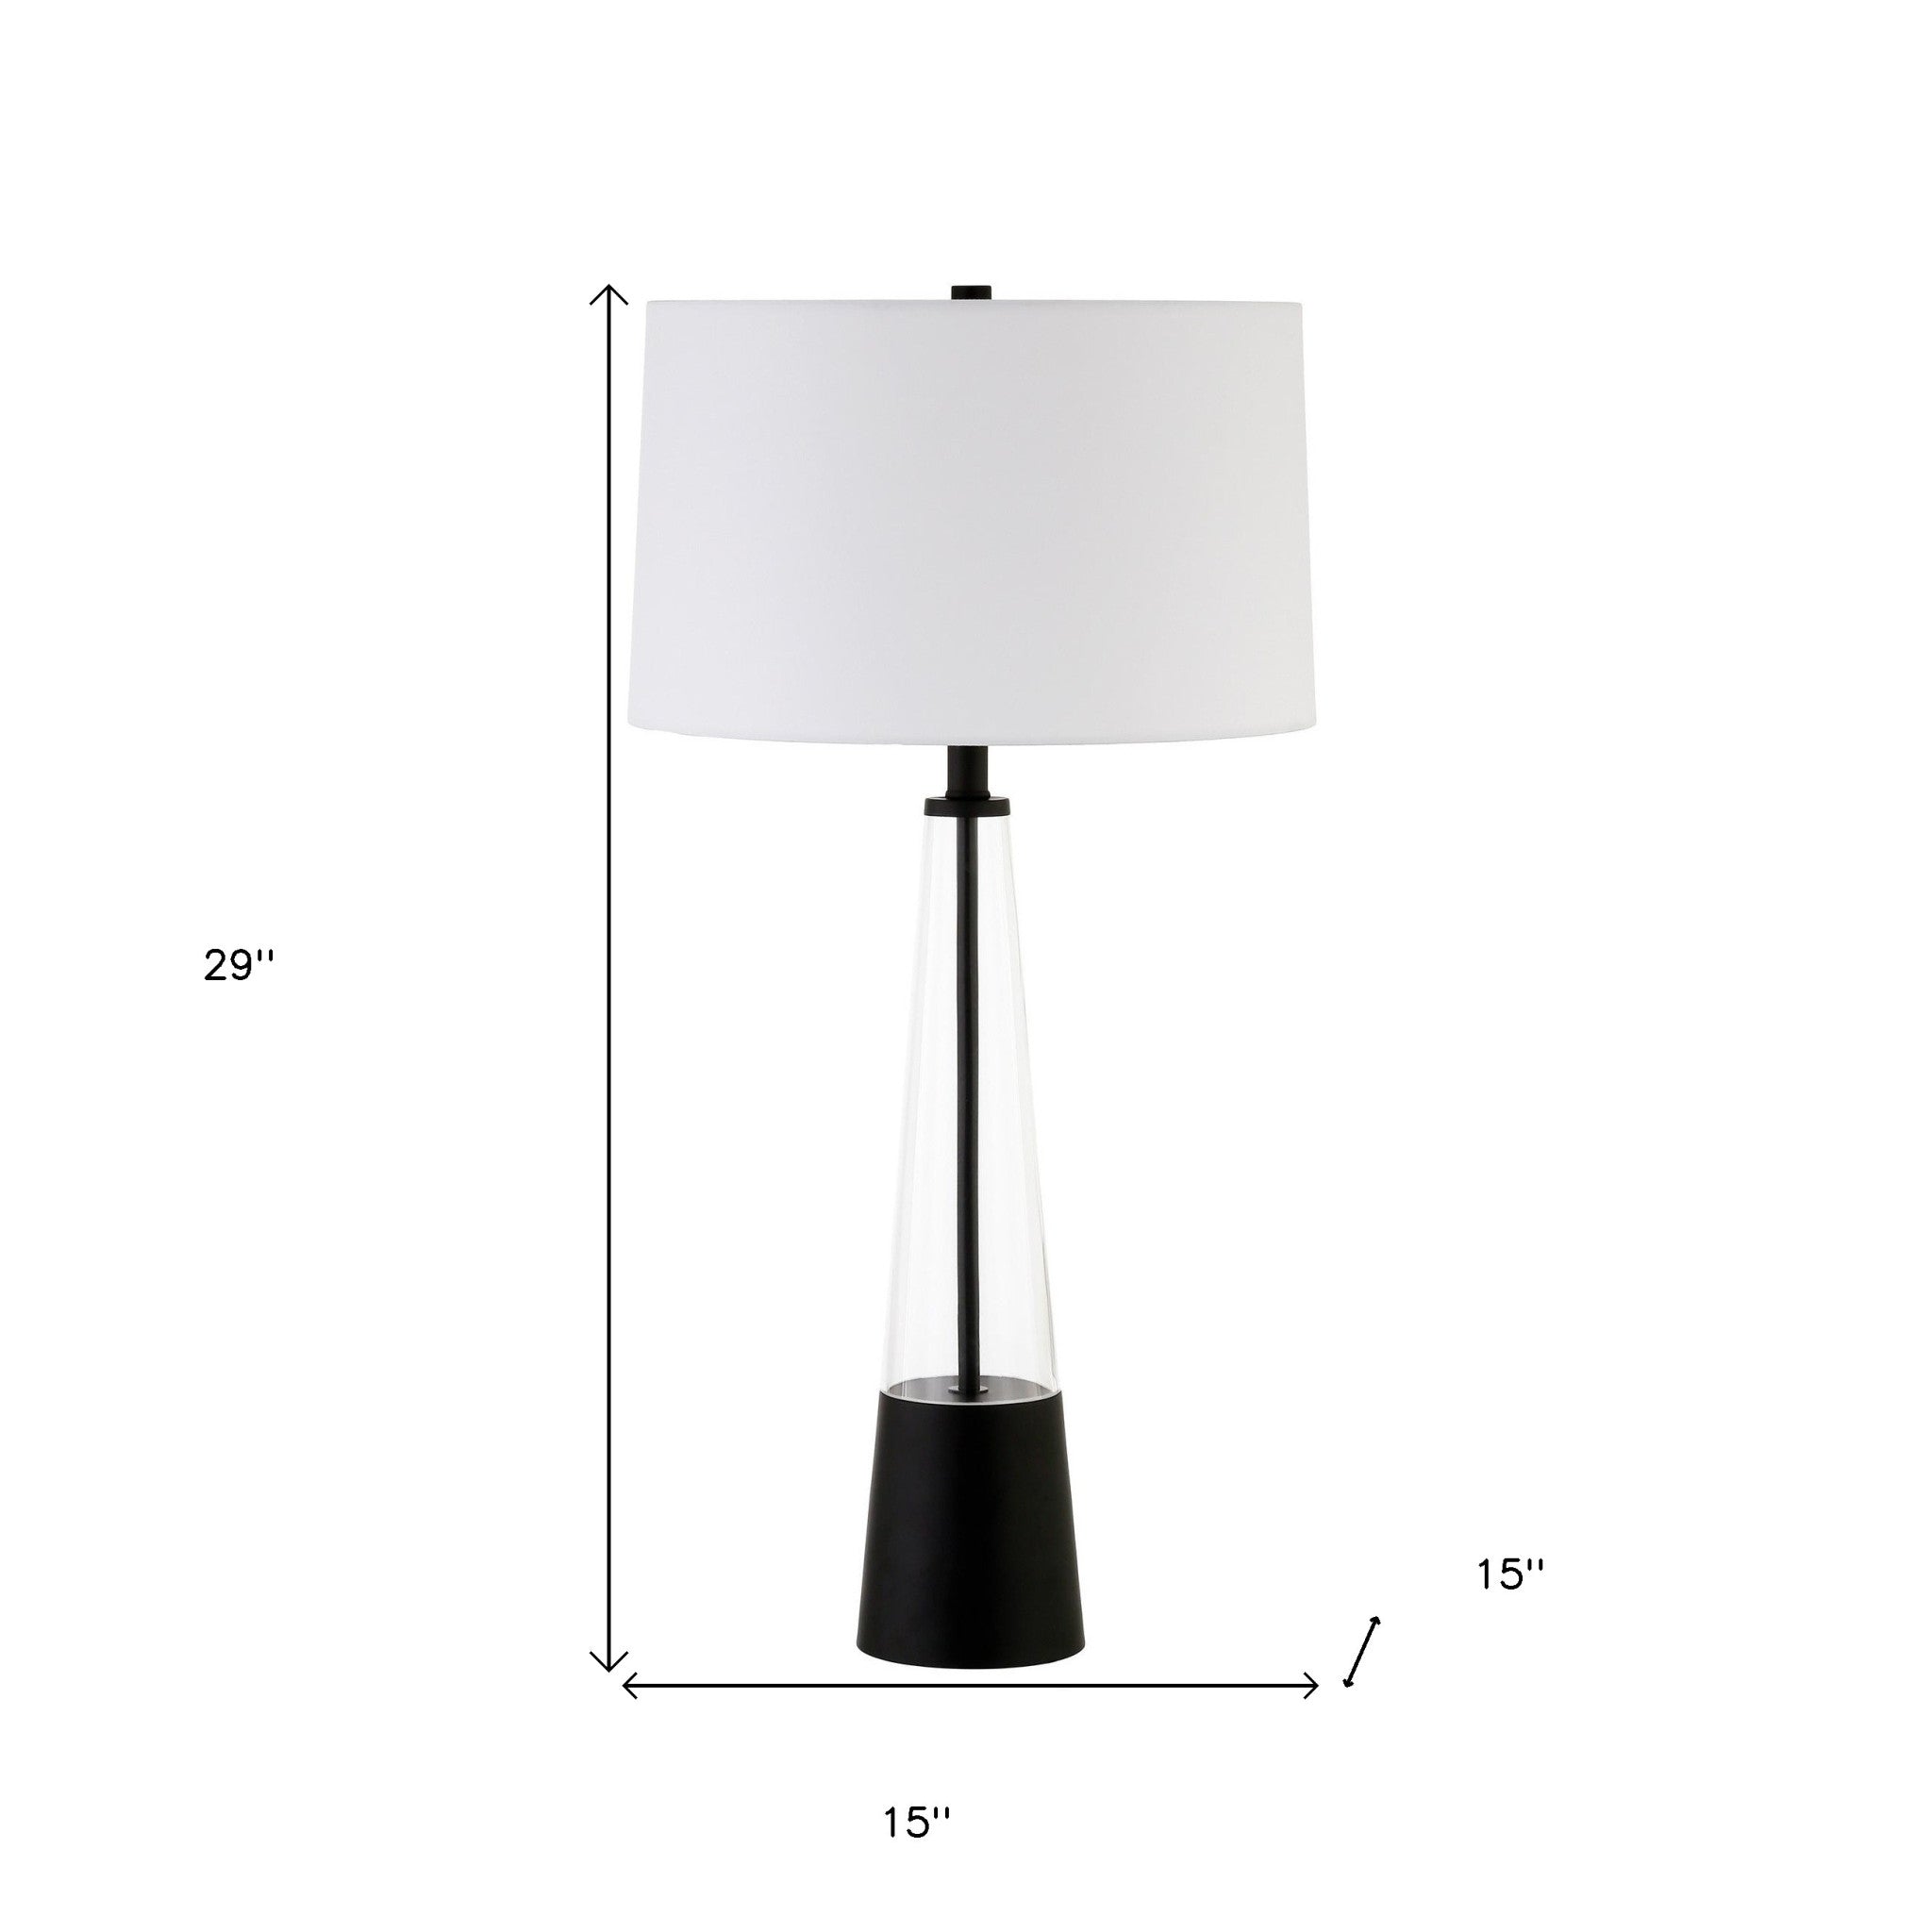 29" Black Glass Table Lamp With White Drum Shade